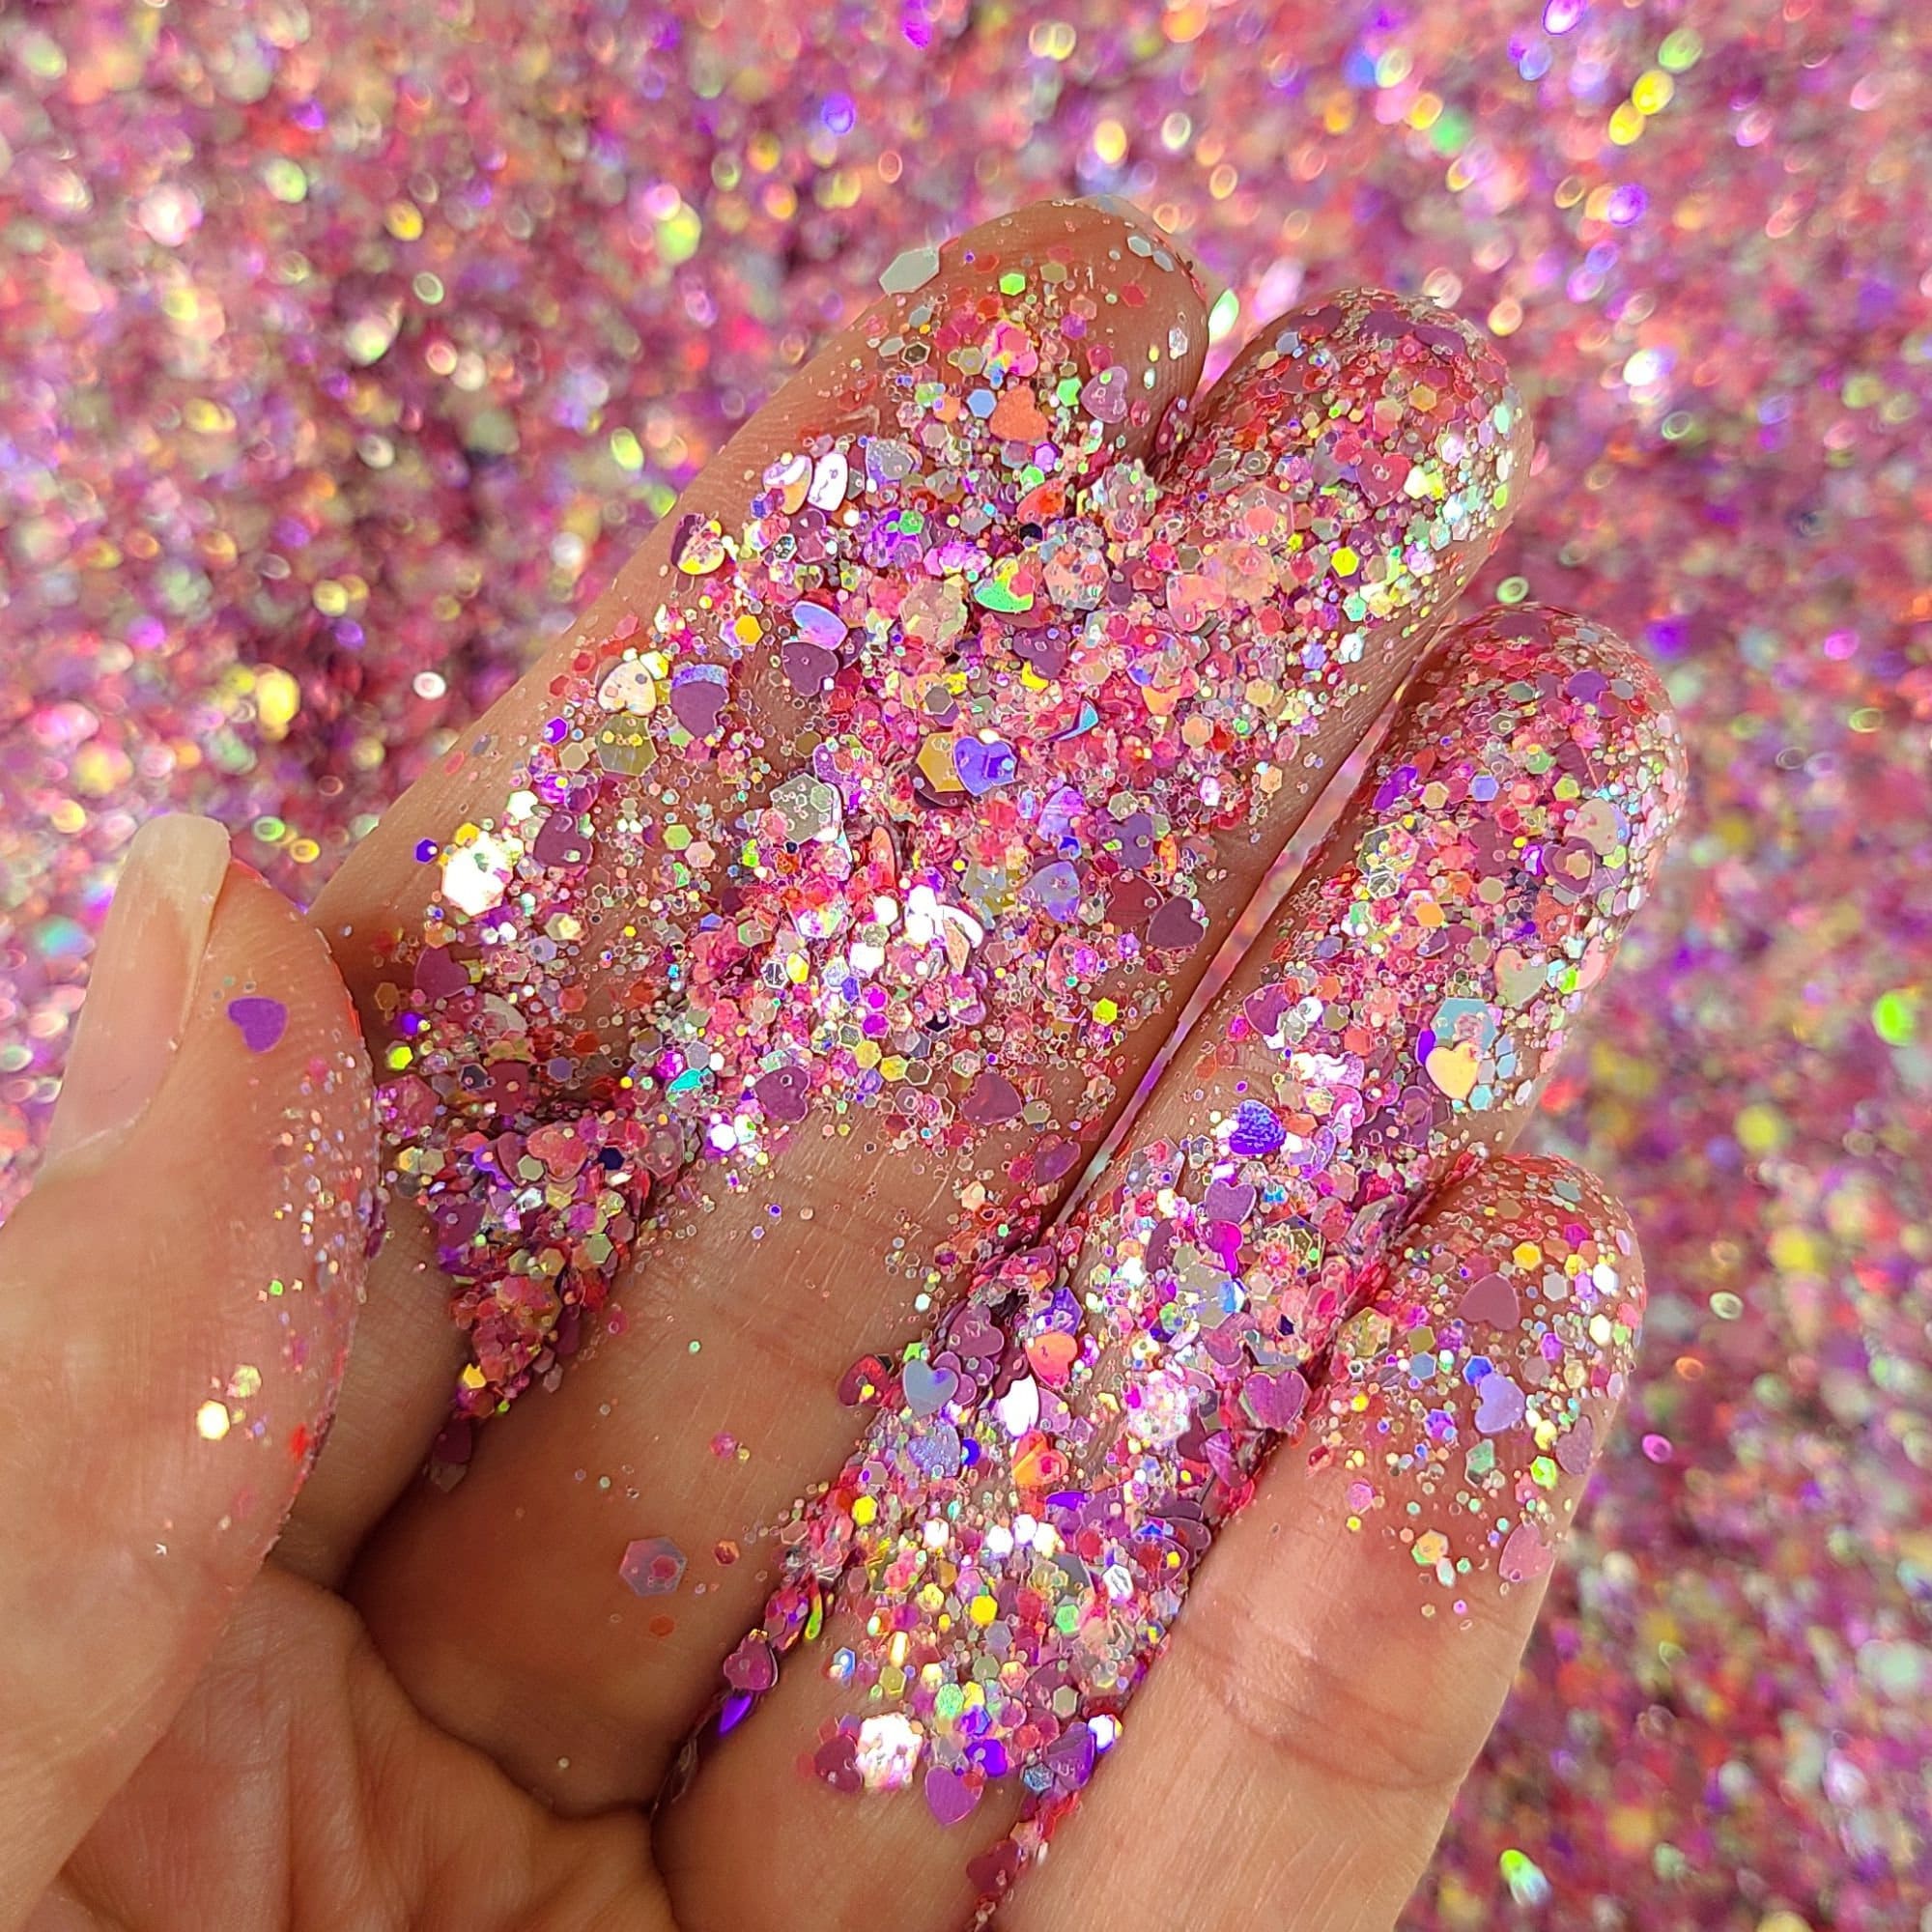 Bend And Snap Body Loose Glitter